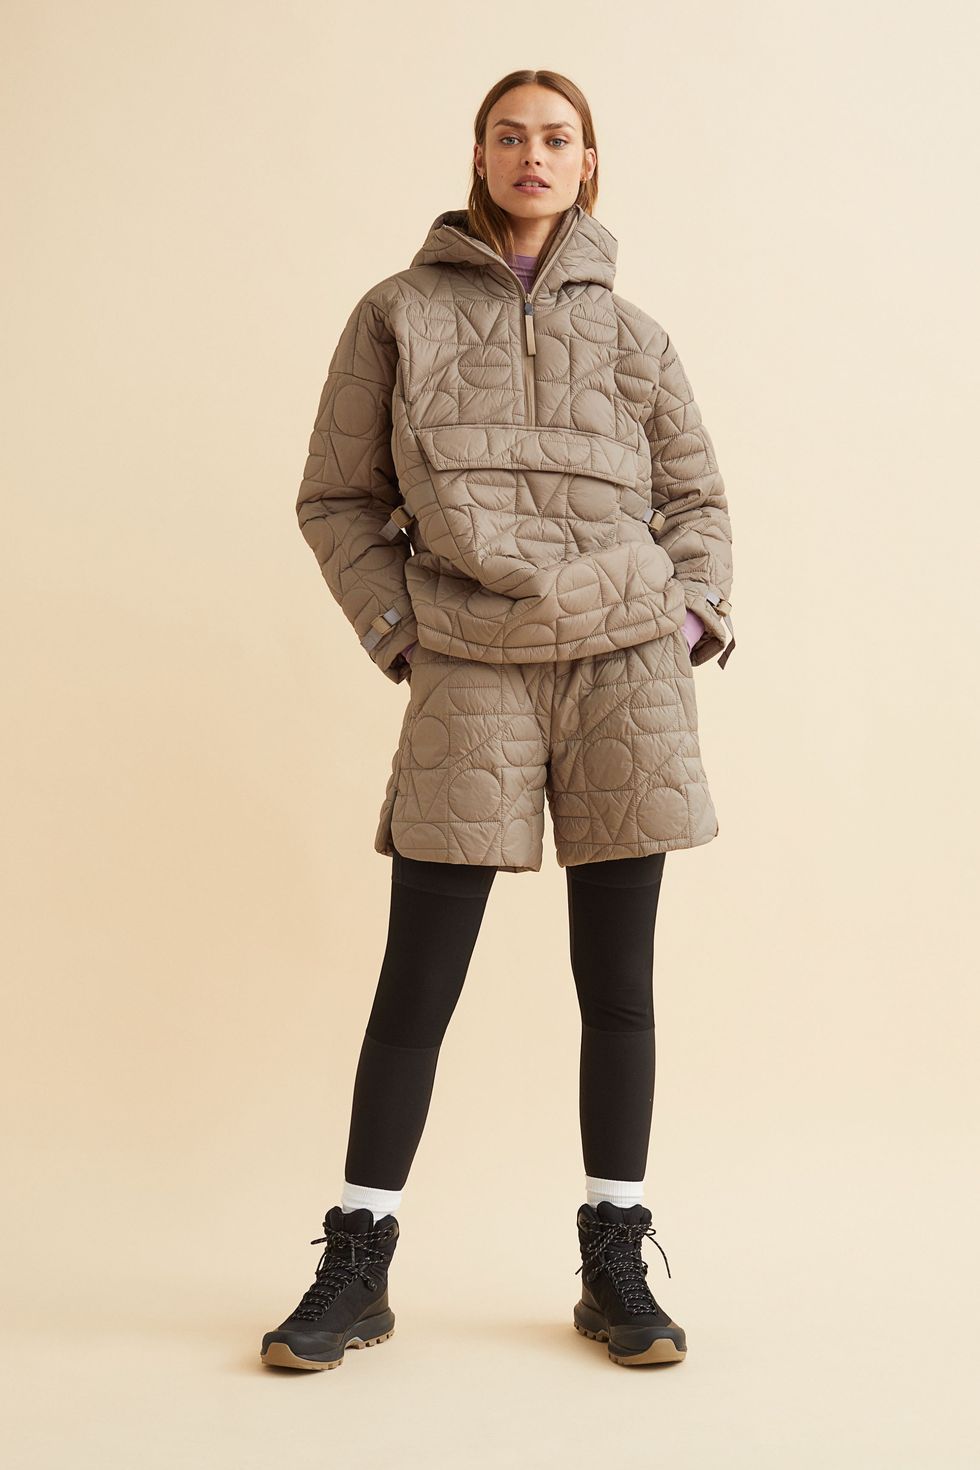 13 best puffer jackets of 2023, plus what to look for in one